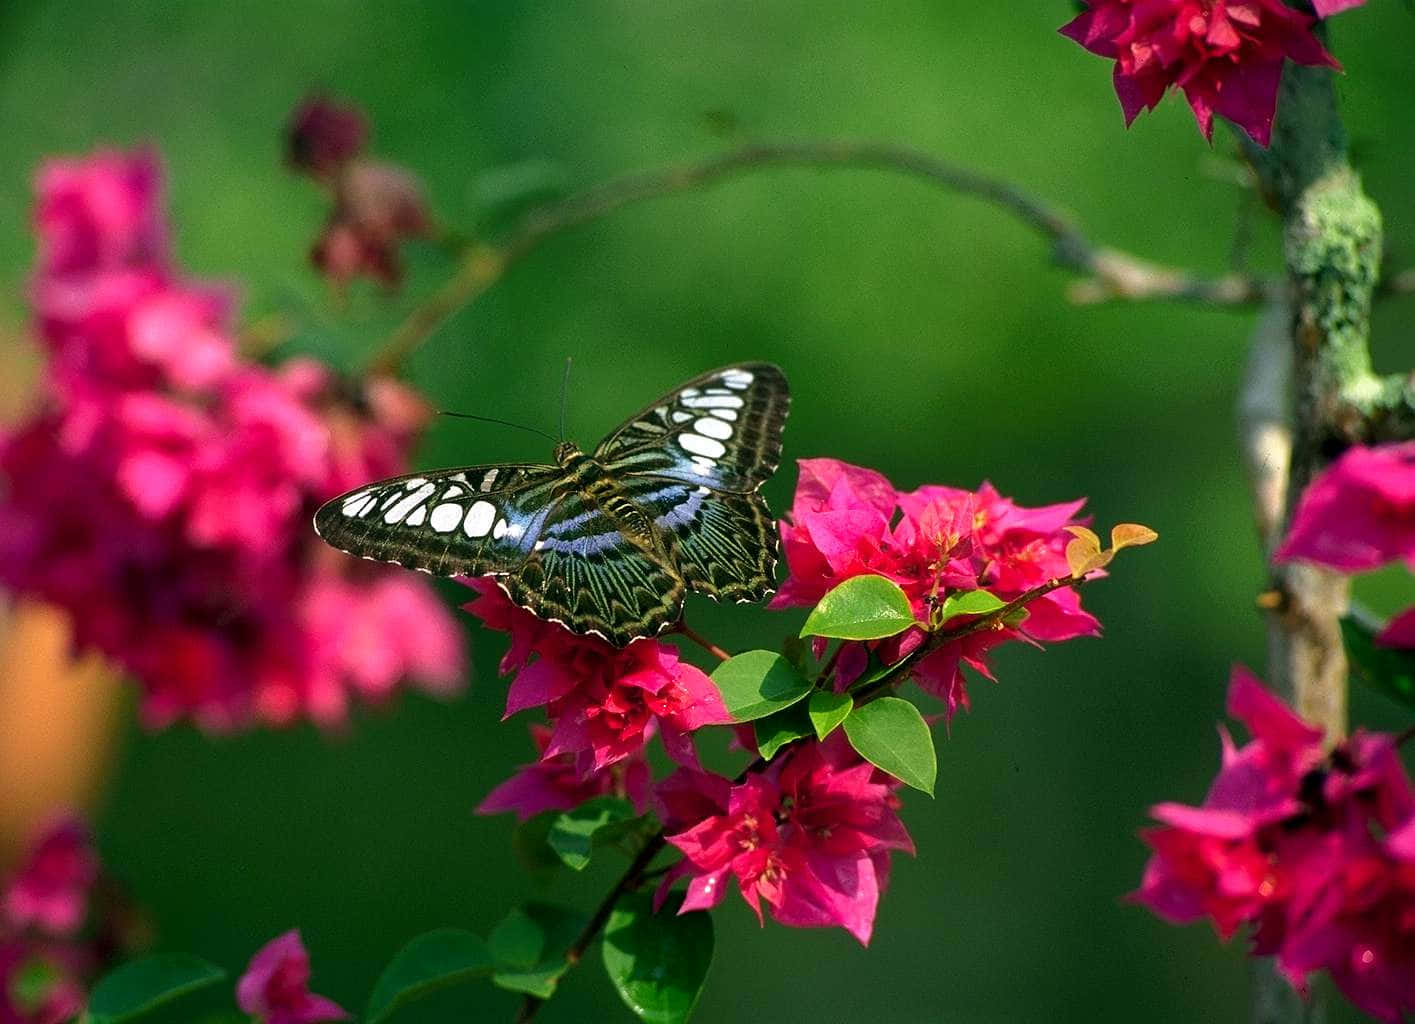 A butterfly resting on a vibrant pink flower.